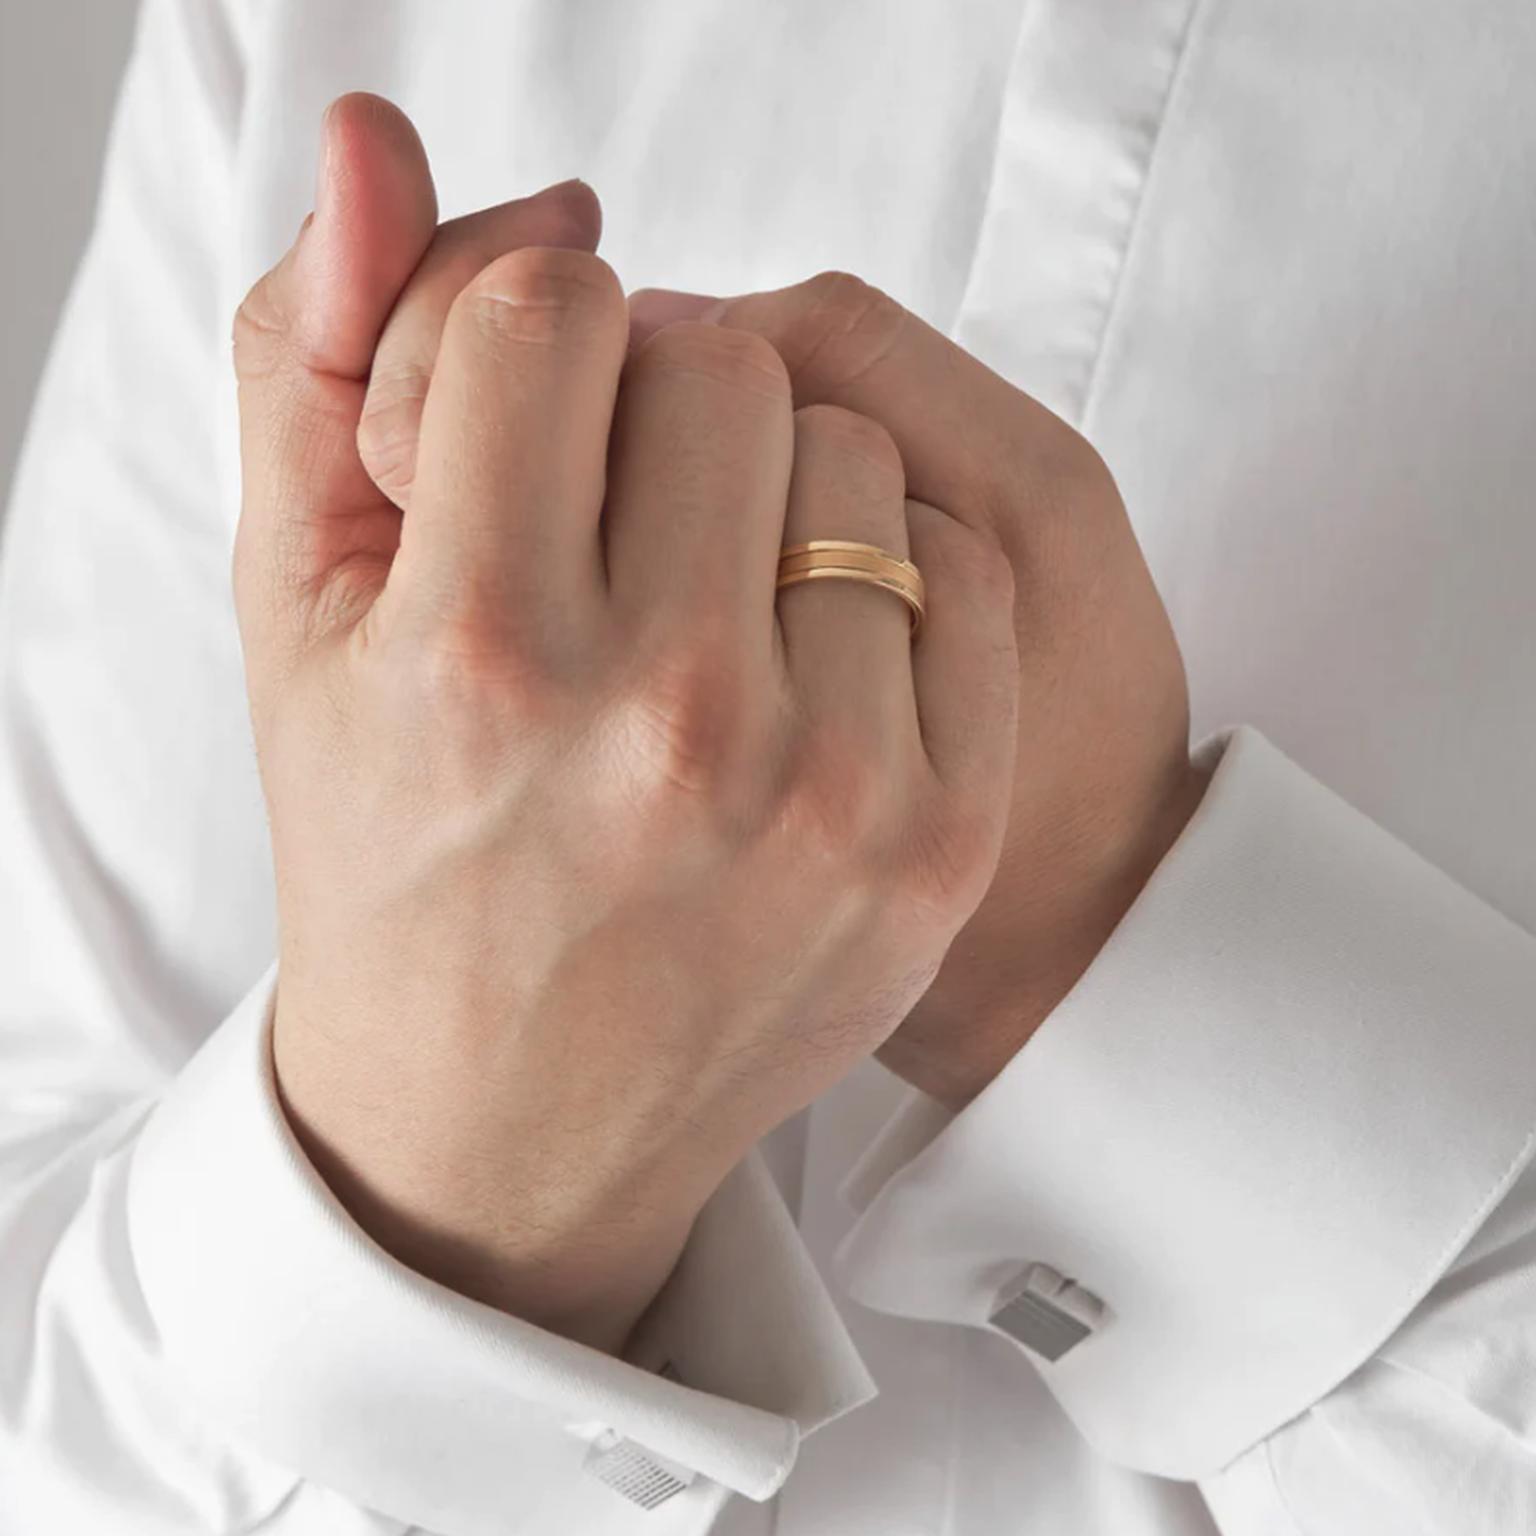 Will you marry me, too? : Jewellers are adapting to the rise of mutual proposals